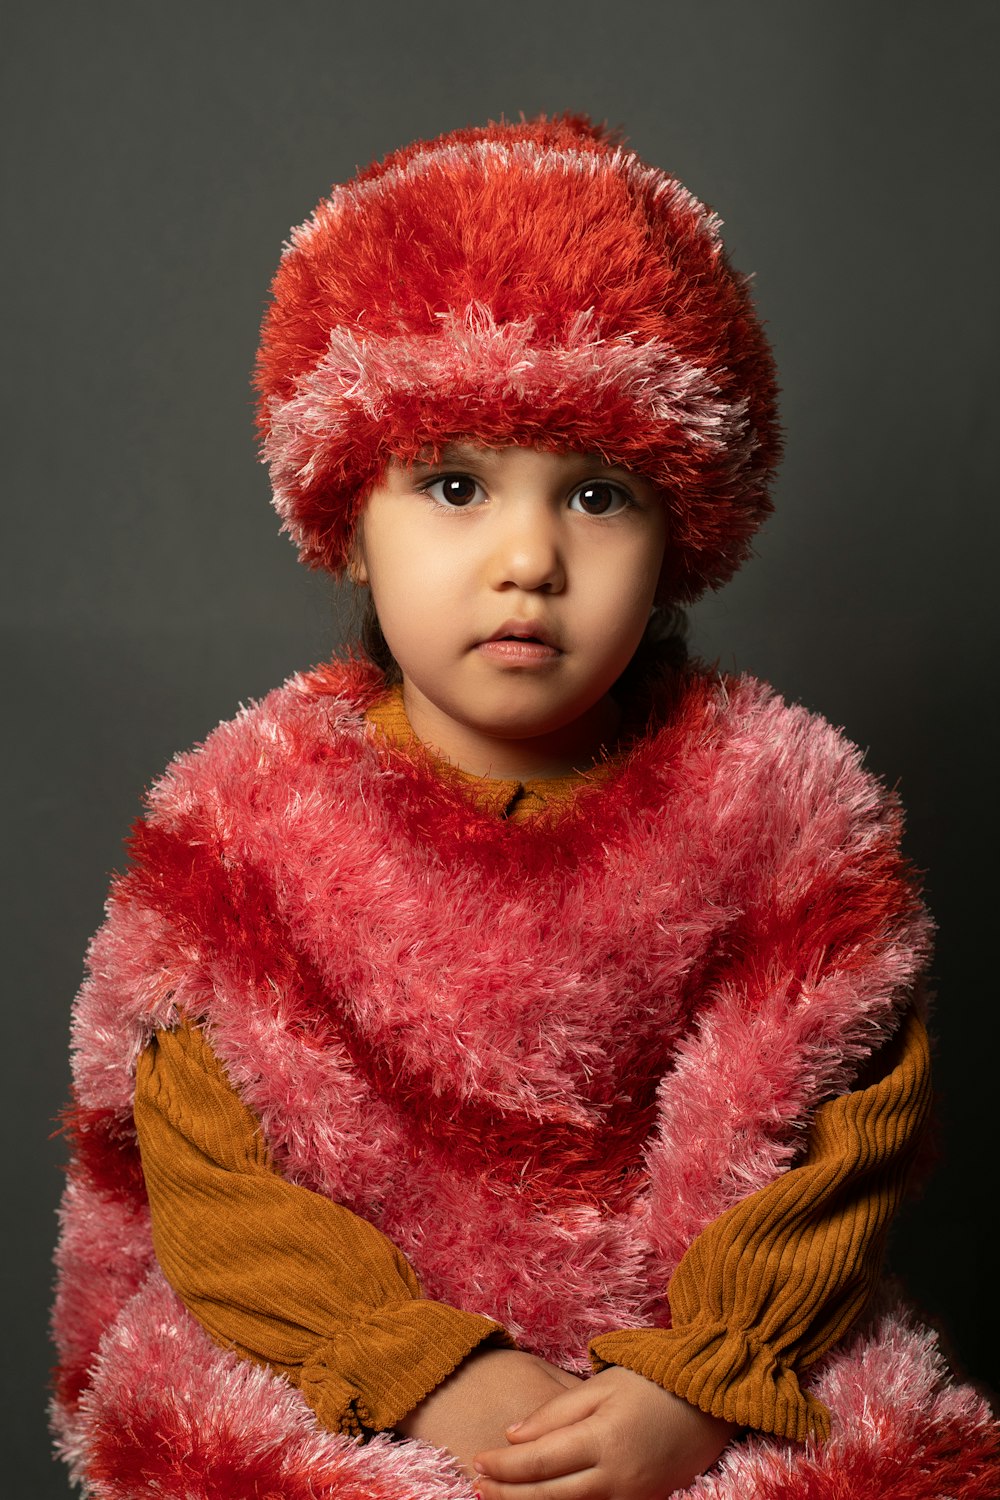 a young child wearing a red fur coat